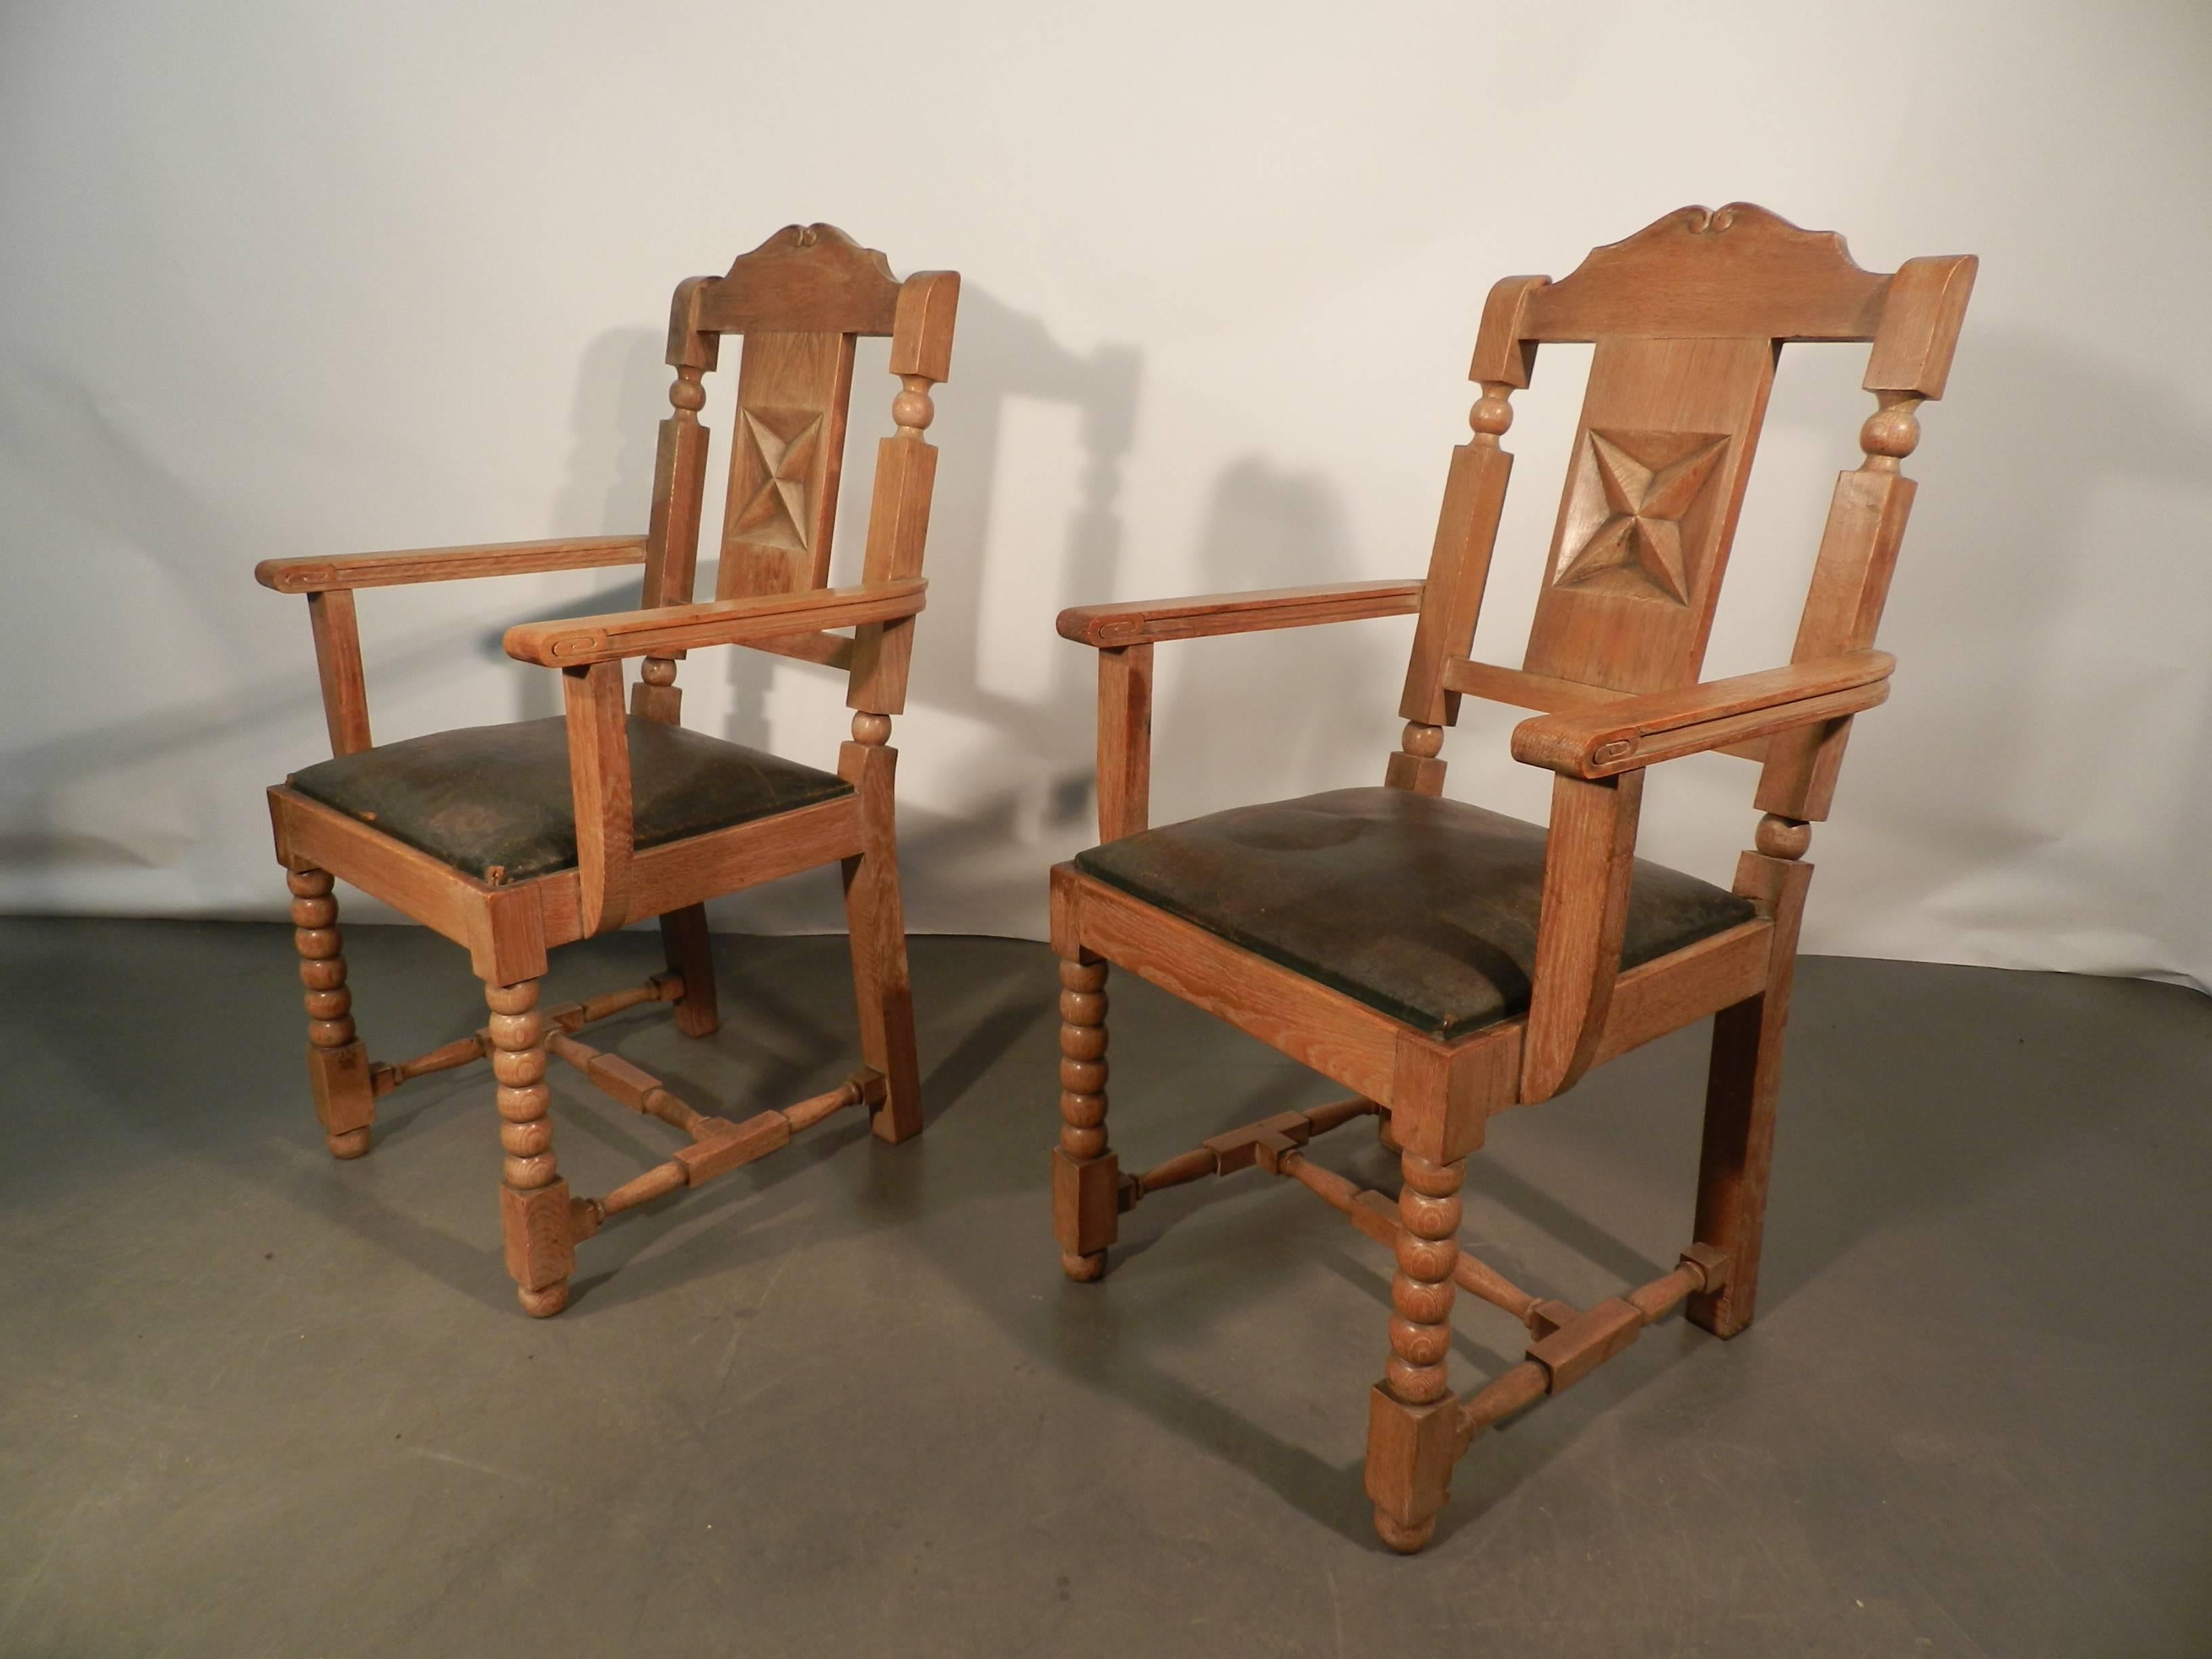 In the style of Charles Dudouyt, two neo rustique oak armchairs.
Leather damaged.